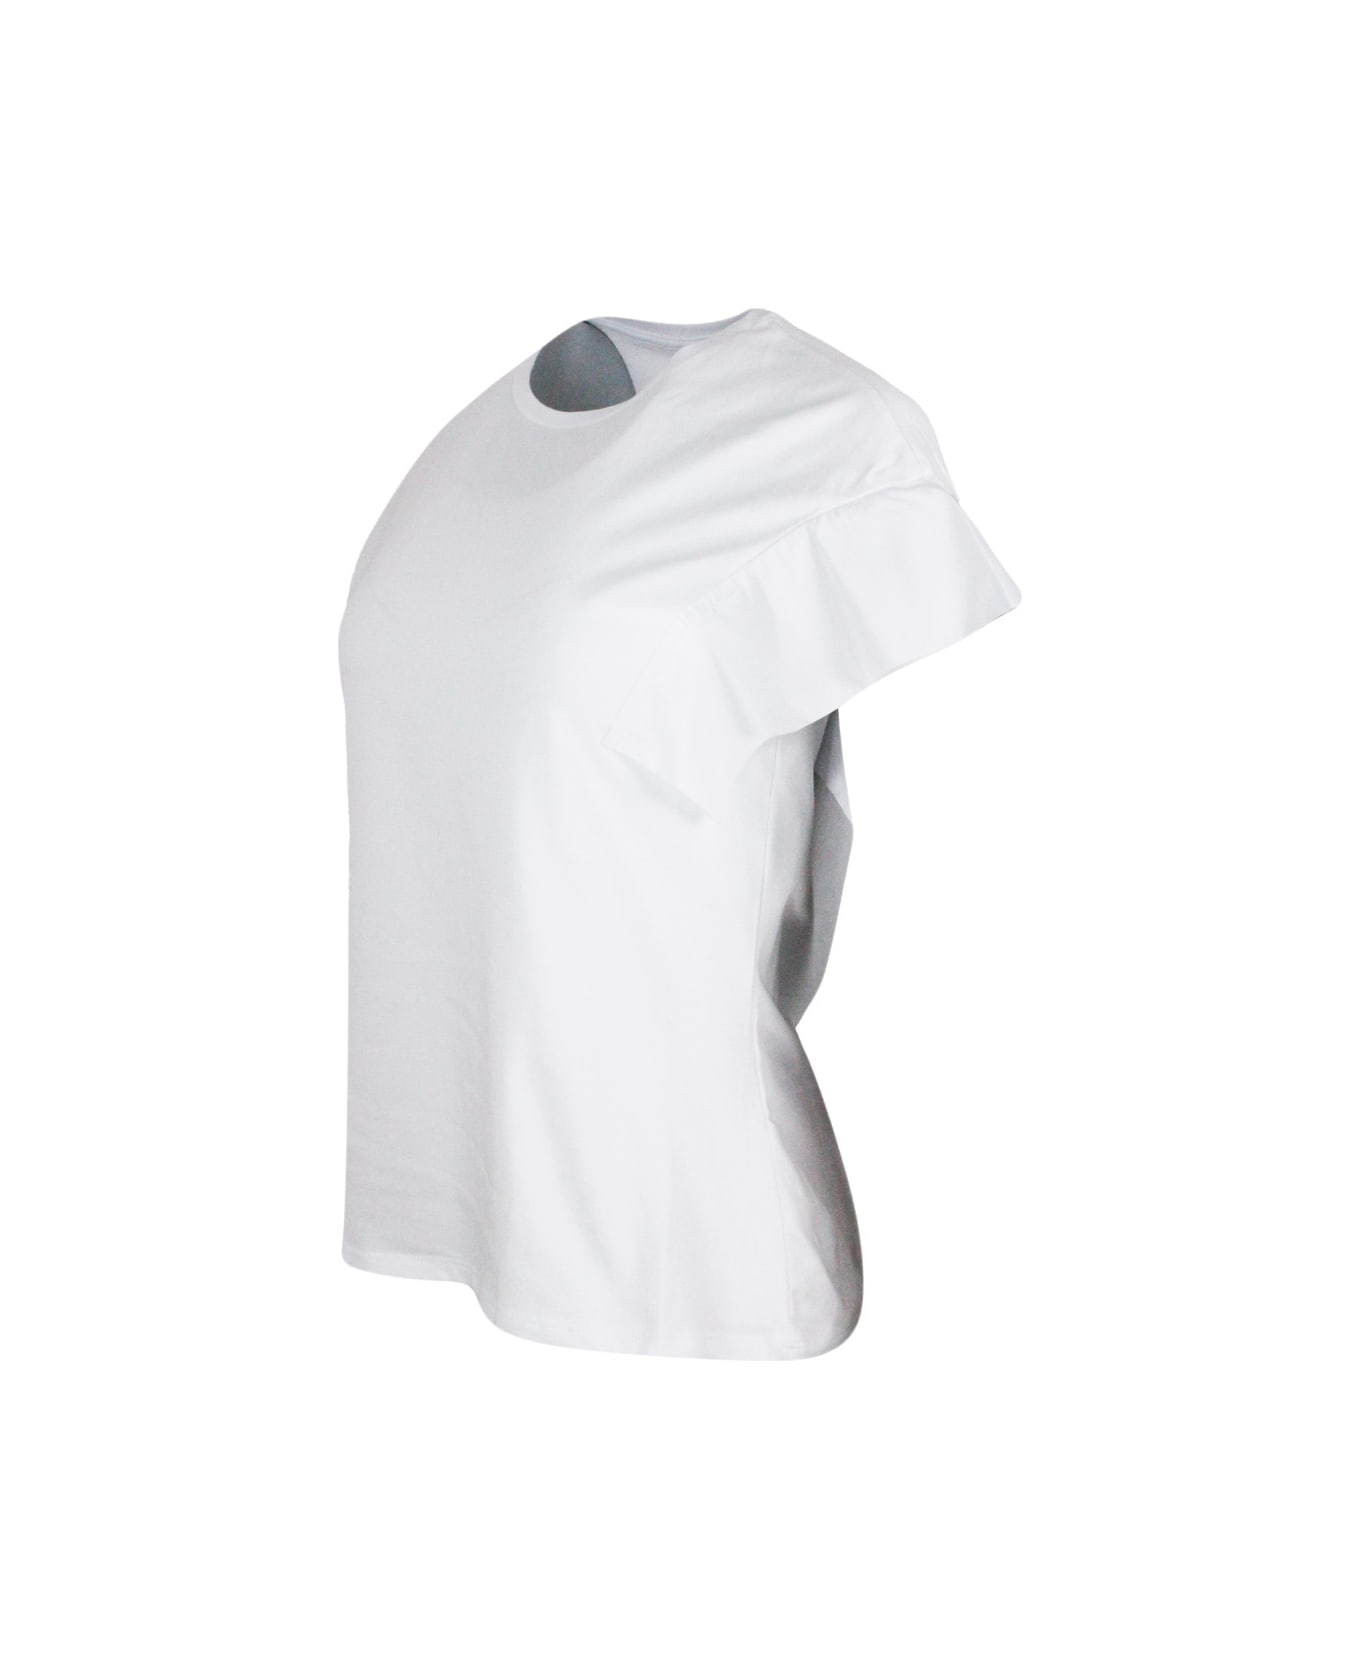 Lorena Antoniazzi Round Neck T-shirt In Cotton Jersey With Flared Cap Sleeves - White Tシャツ